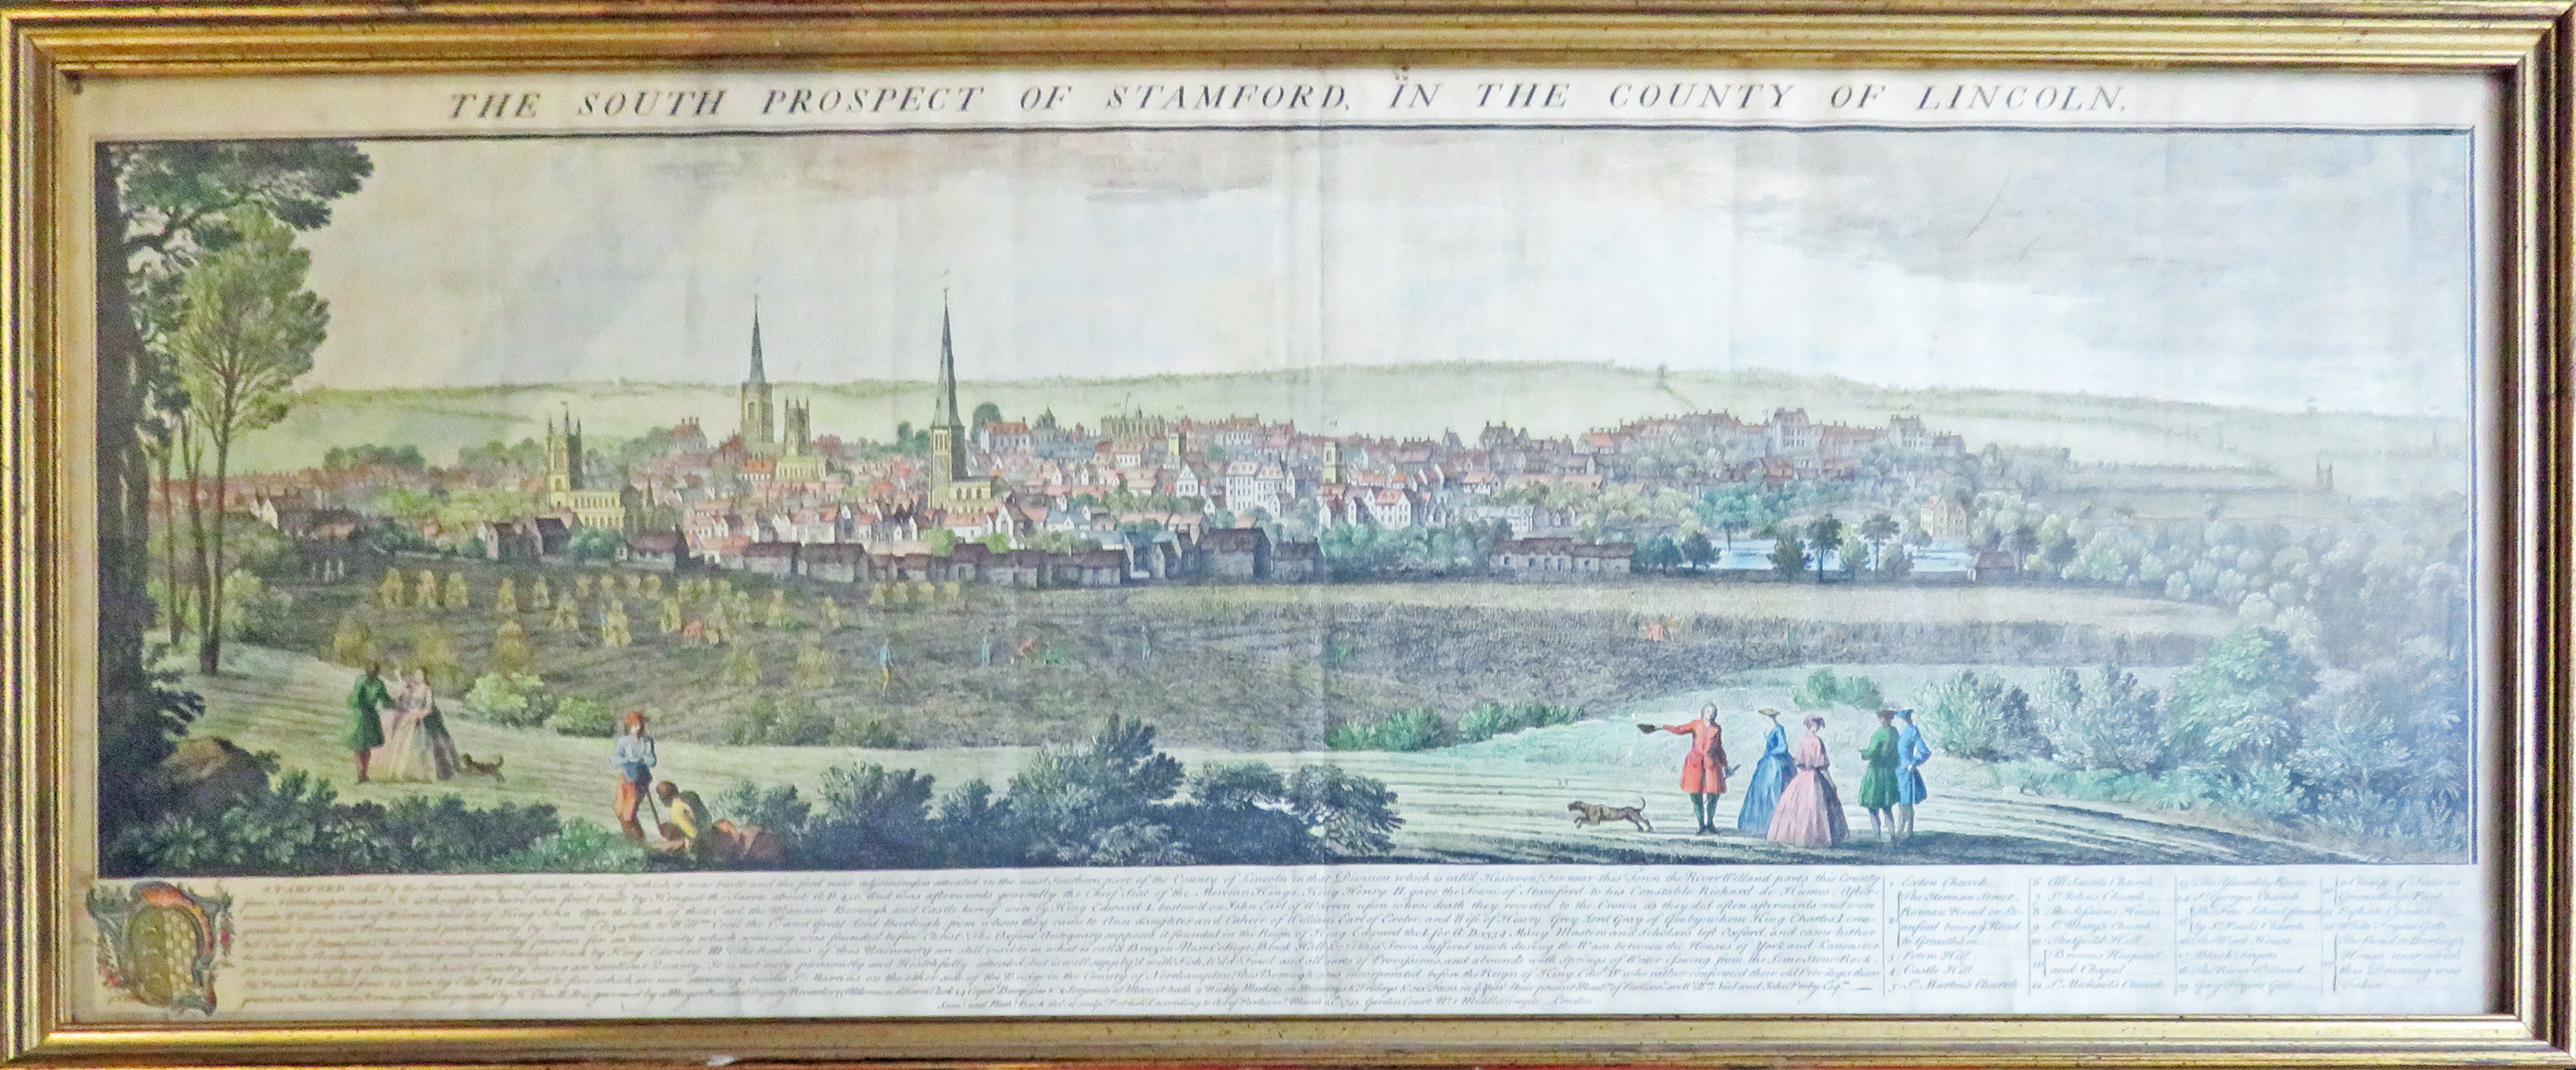 The South Prospect of Stamford, in the County of Lincoln